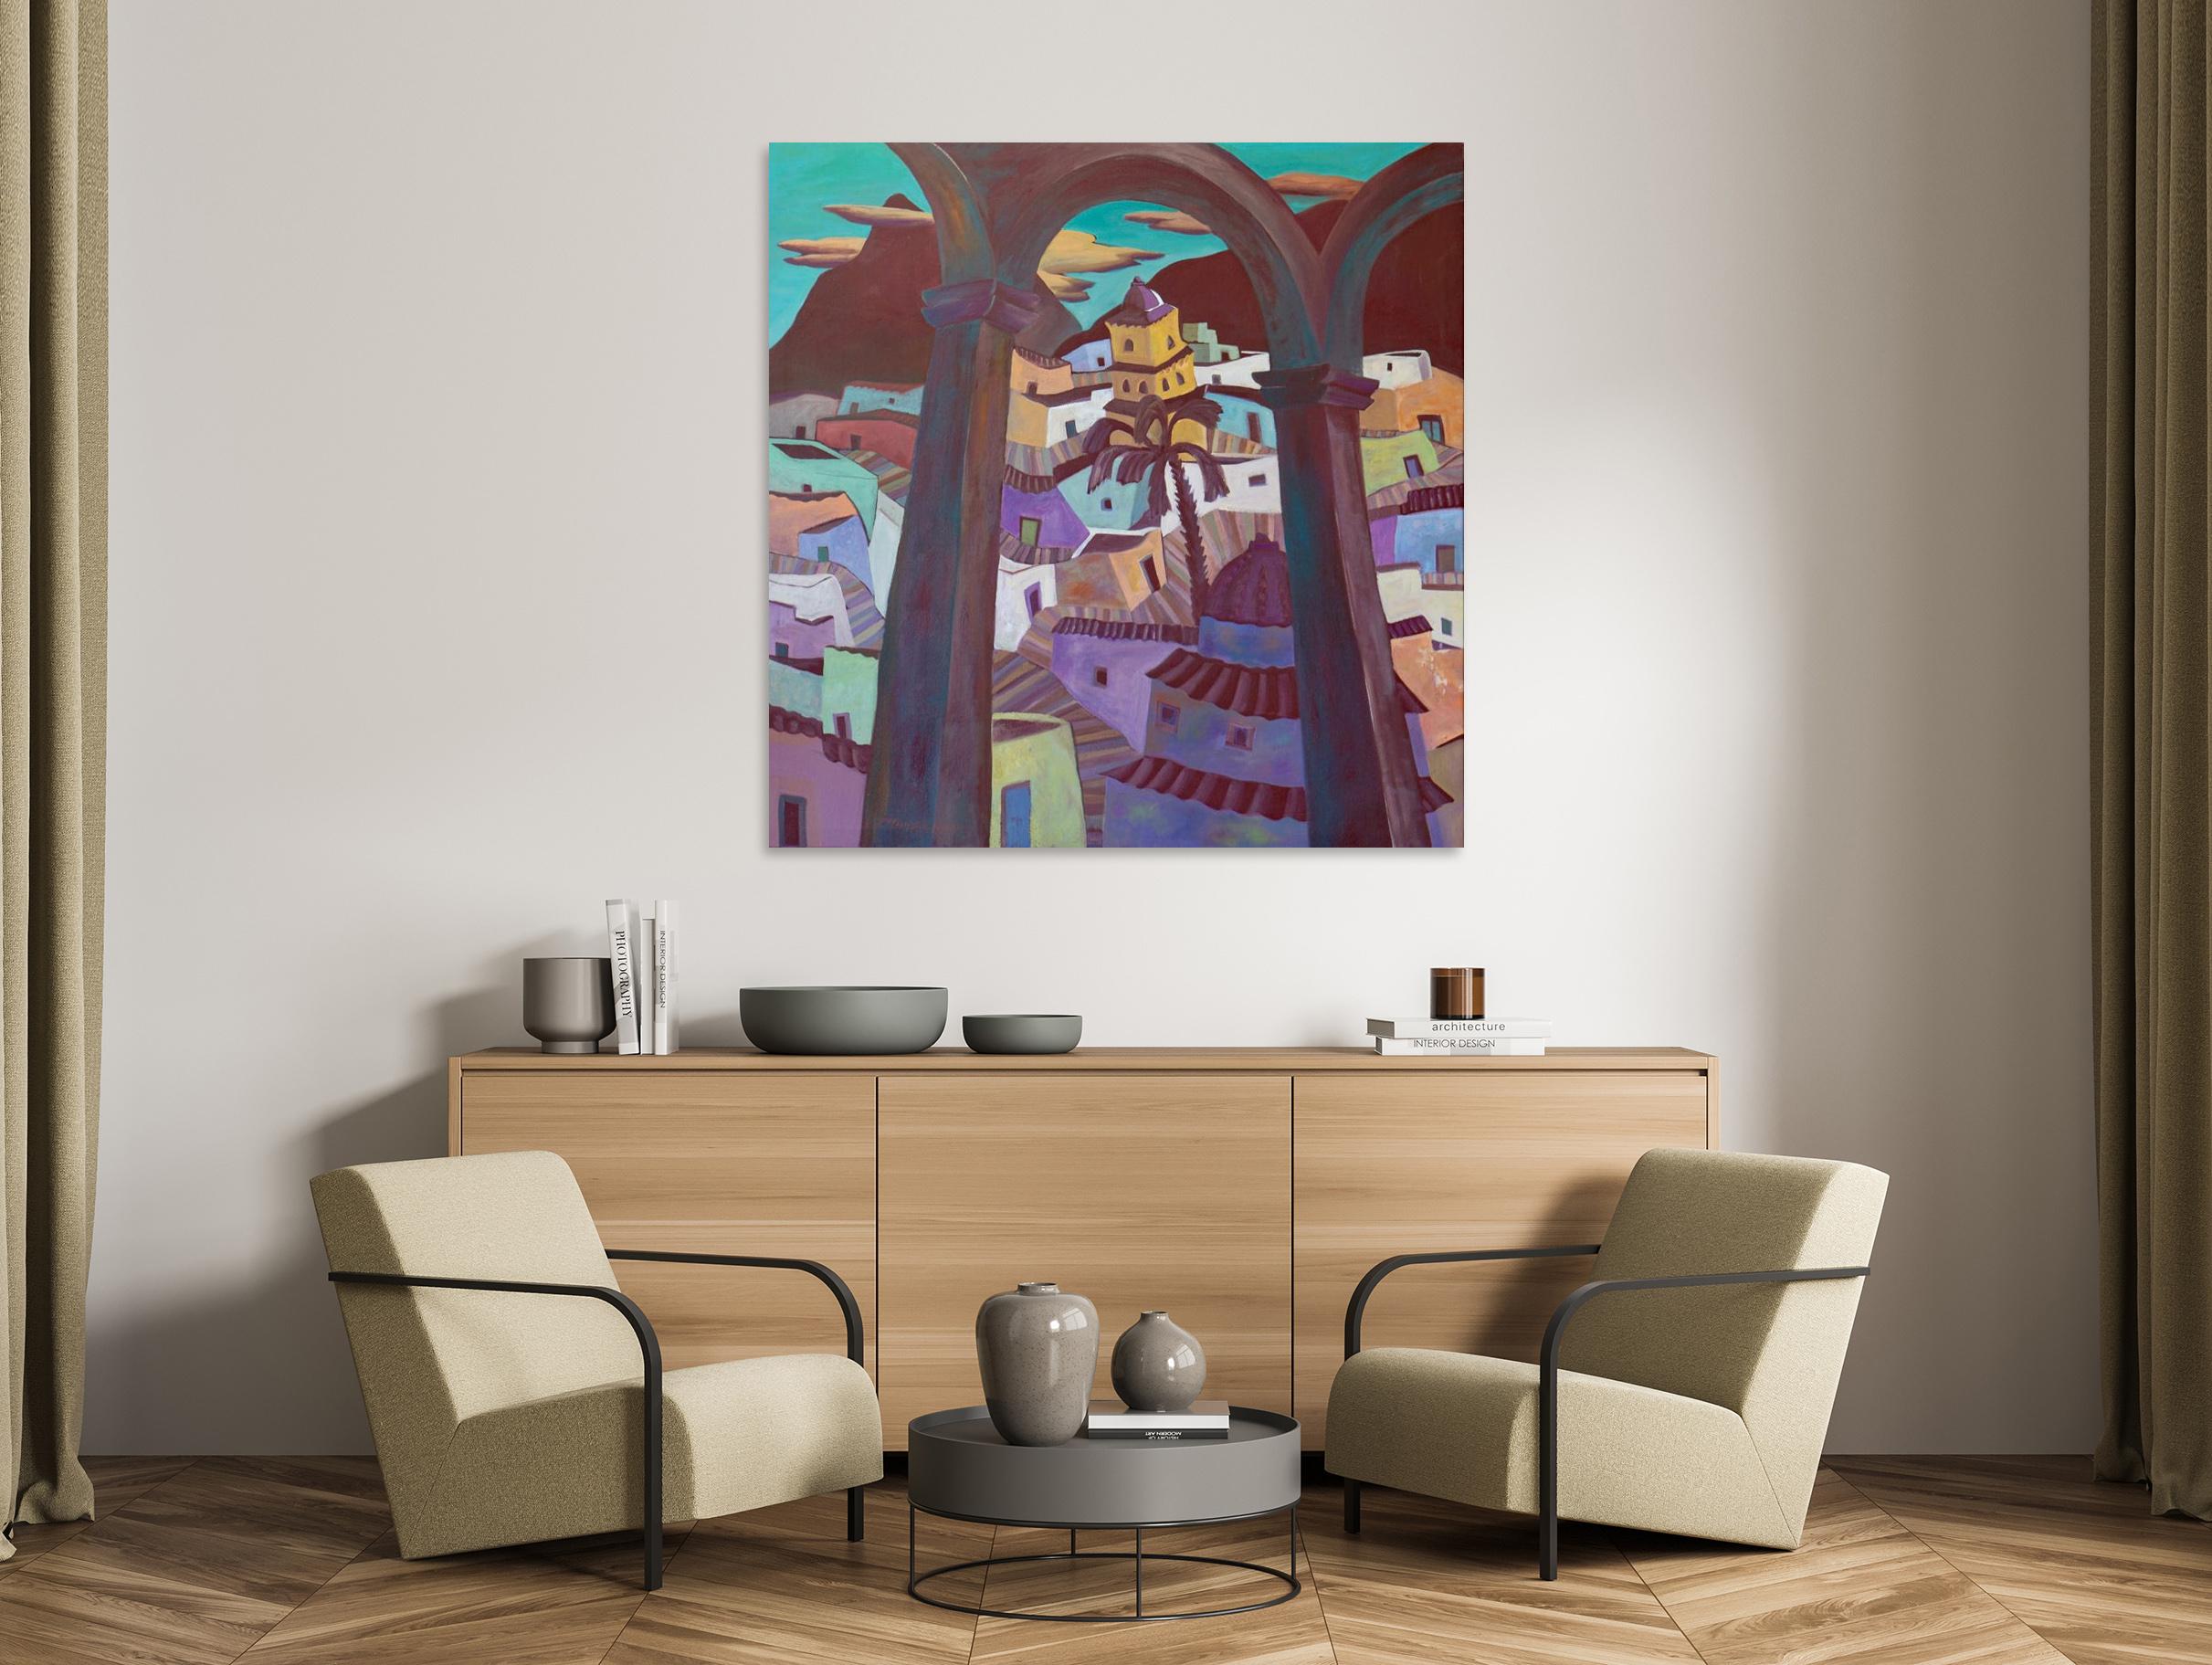 Large Mexican abstract village framed in with arches. Colors are an array of soft pastels and the village undulates in a gentle soothing rhythm.

Mexican Village With Arch - Landscape Painting - Abstract Geometric by Marc Zimmerman

This masterpiece